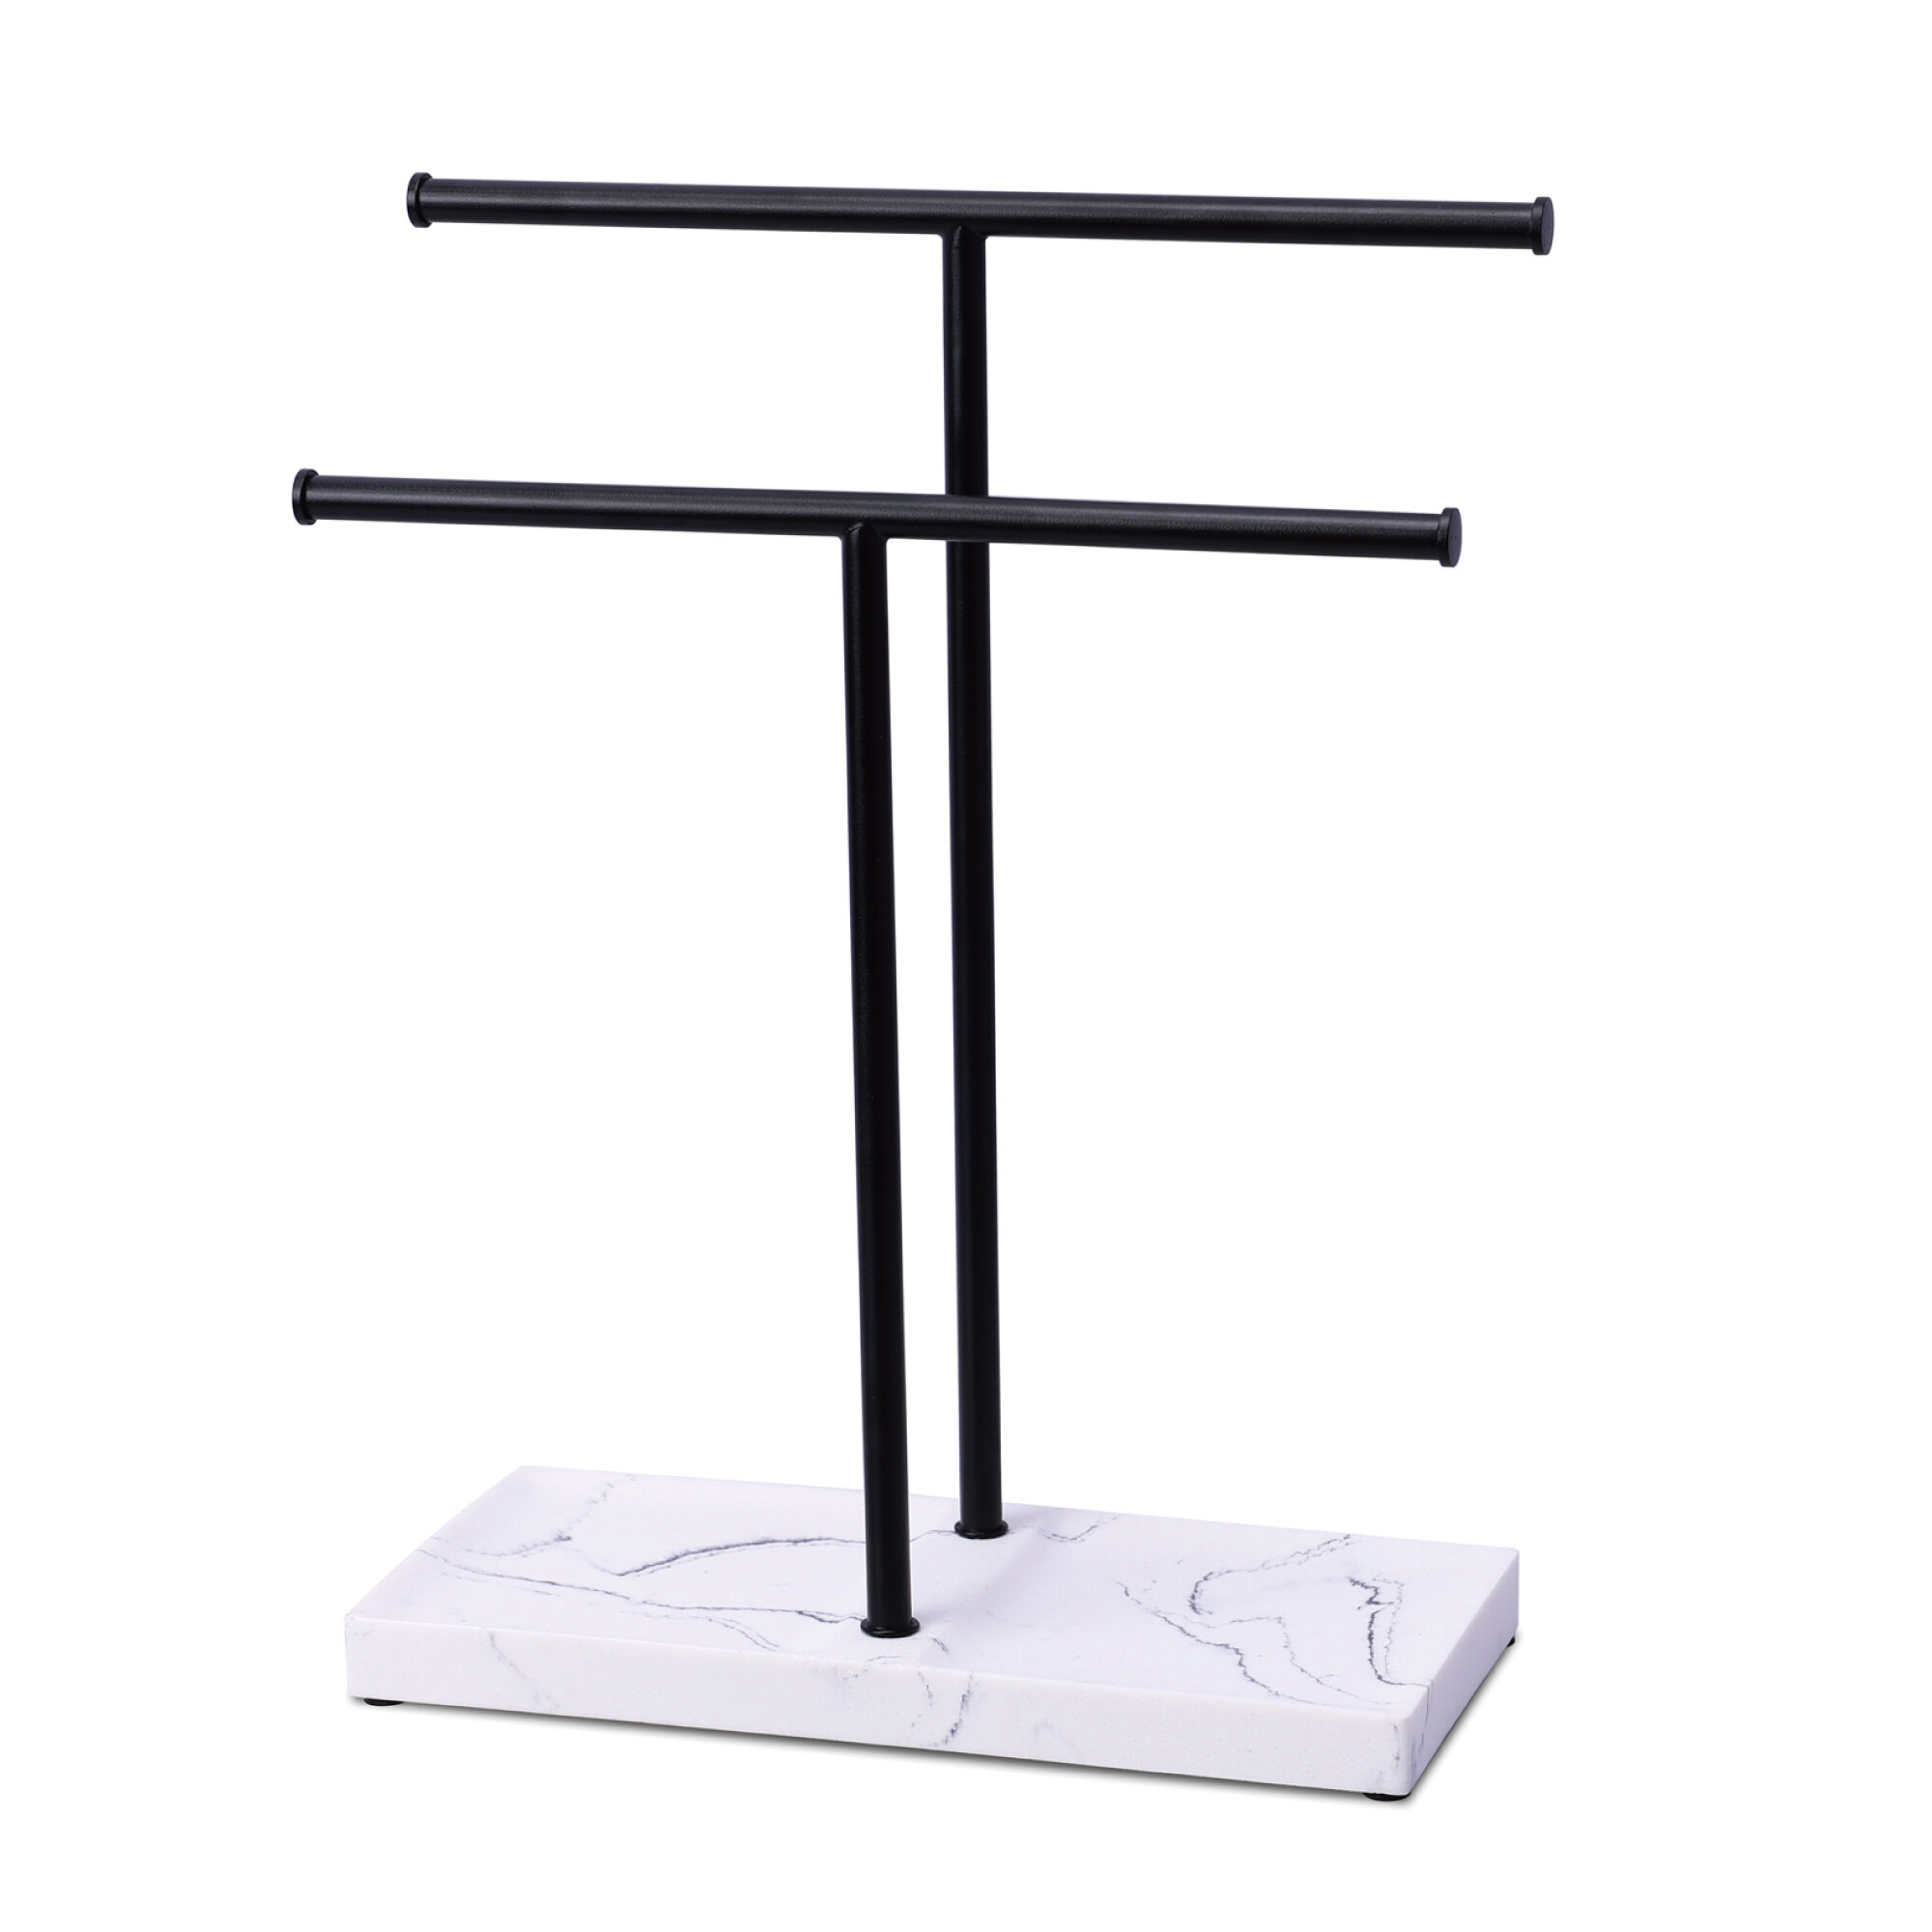 Washroom for Kitchen JJ PRIME Countertop Modern Unique Design Standing Paper Towel Holder with Sturdy Weighted Base Bar 